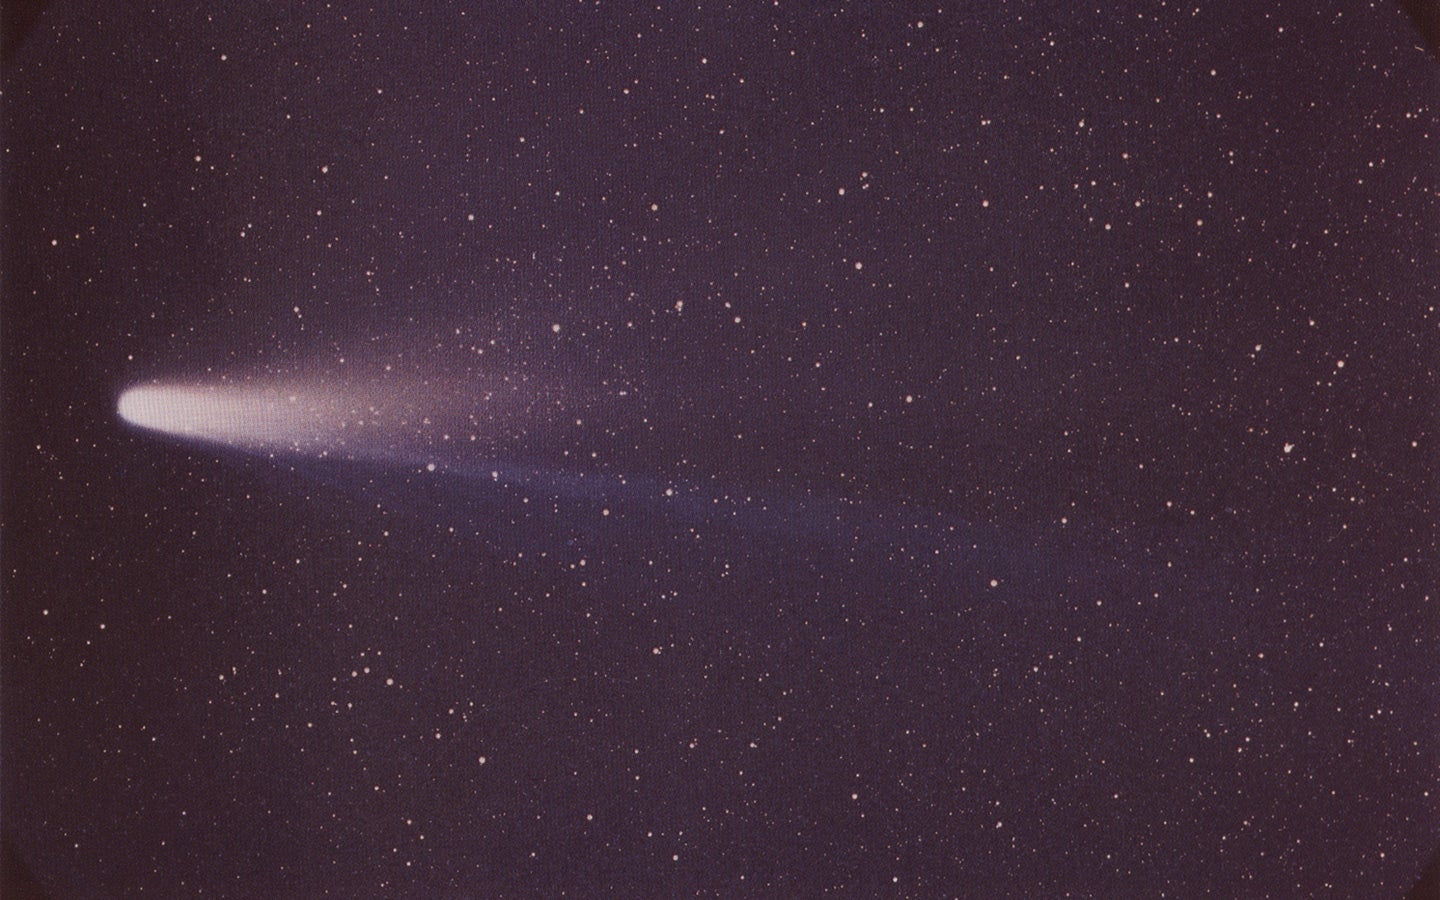 Comet P/Halley as taken March 8, 1986 by W. Liller, Easter Island, part of the International Halley Watch (IHW) Large Scale Phenomena Network.	